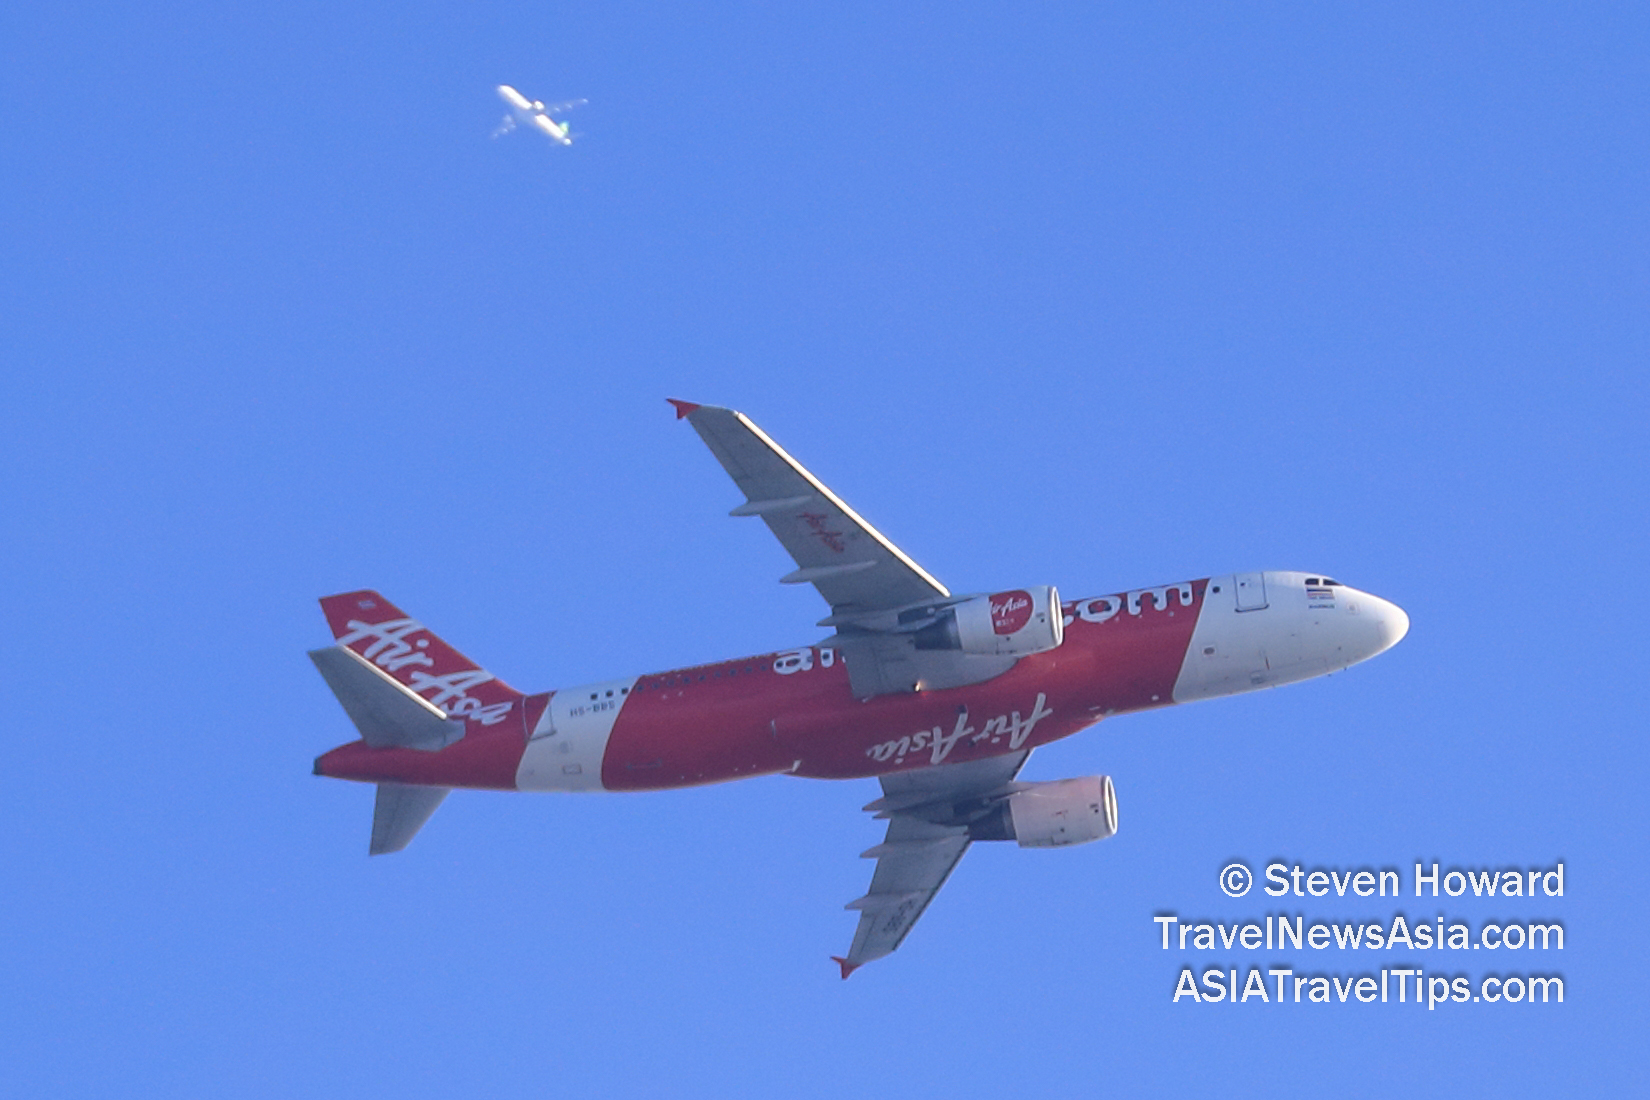 AirAsia Airbus A320 flying overhead with another aircraft above, much higher in the sky above Bangkok, Thailand. Picture by Steven Howard of TravelNewsAsia.com Click to enlarge.